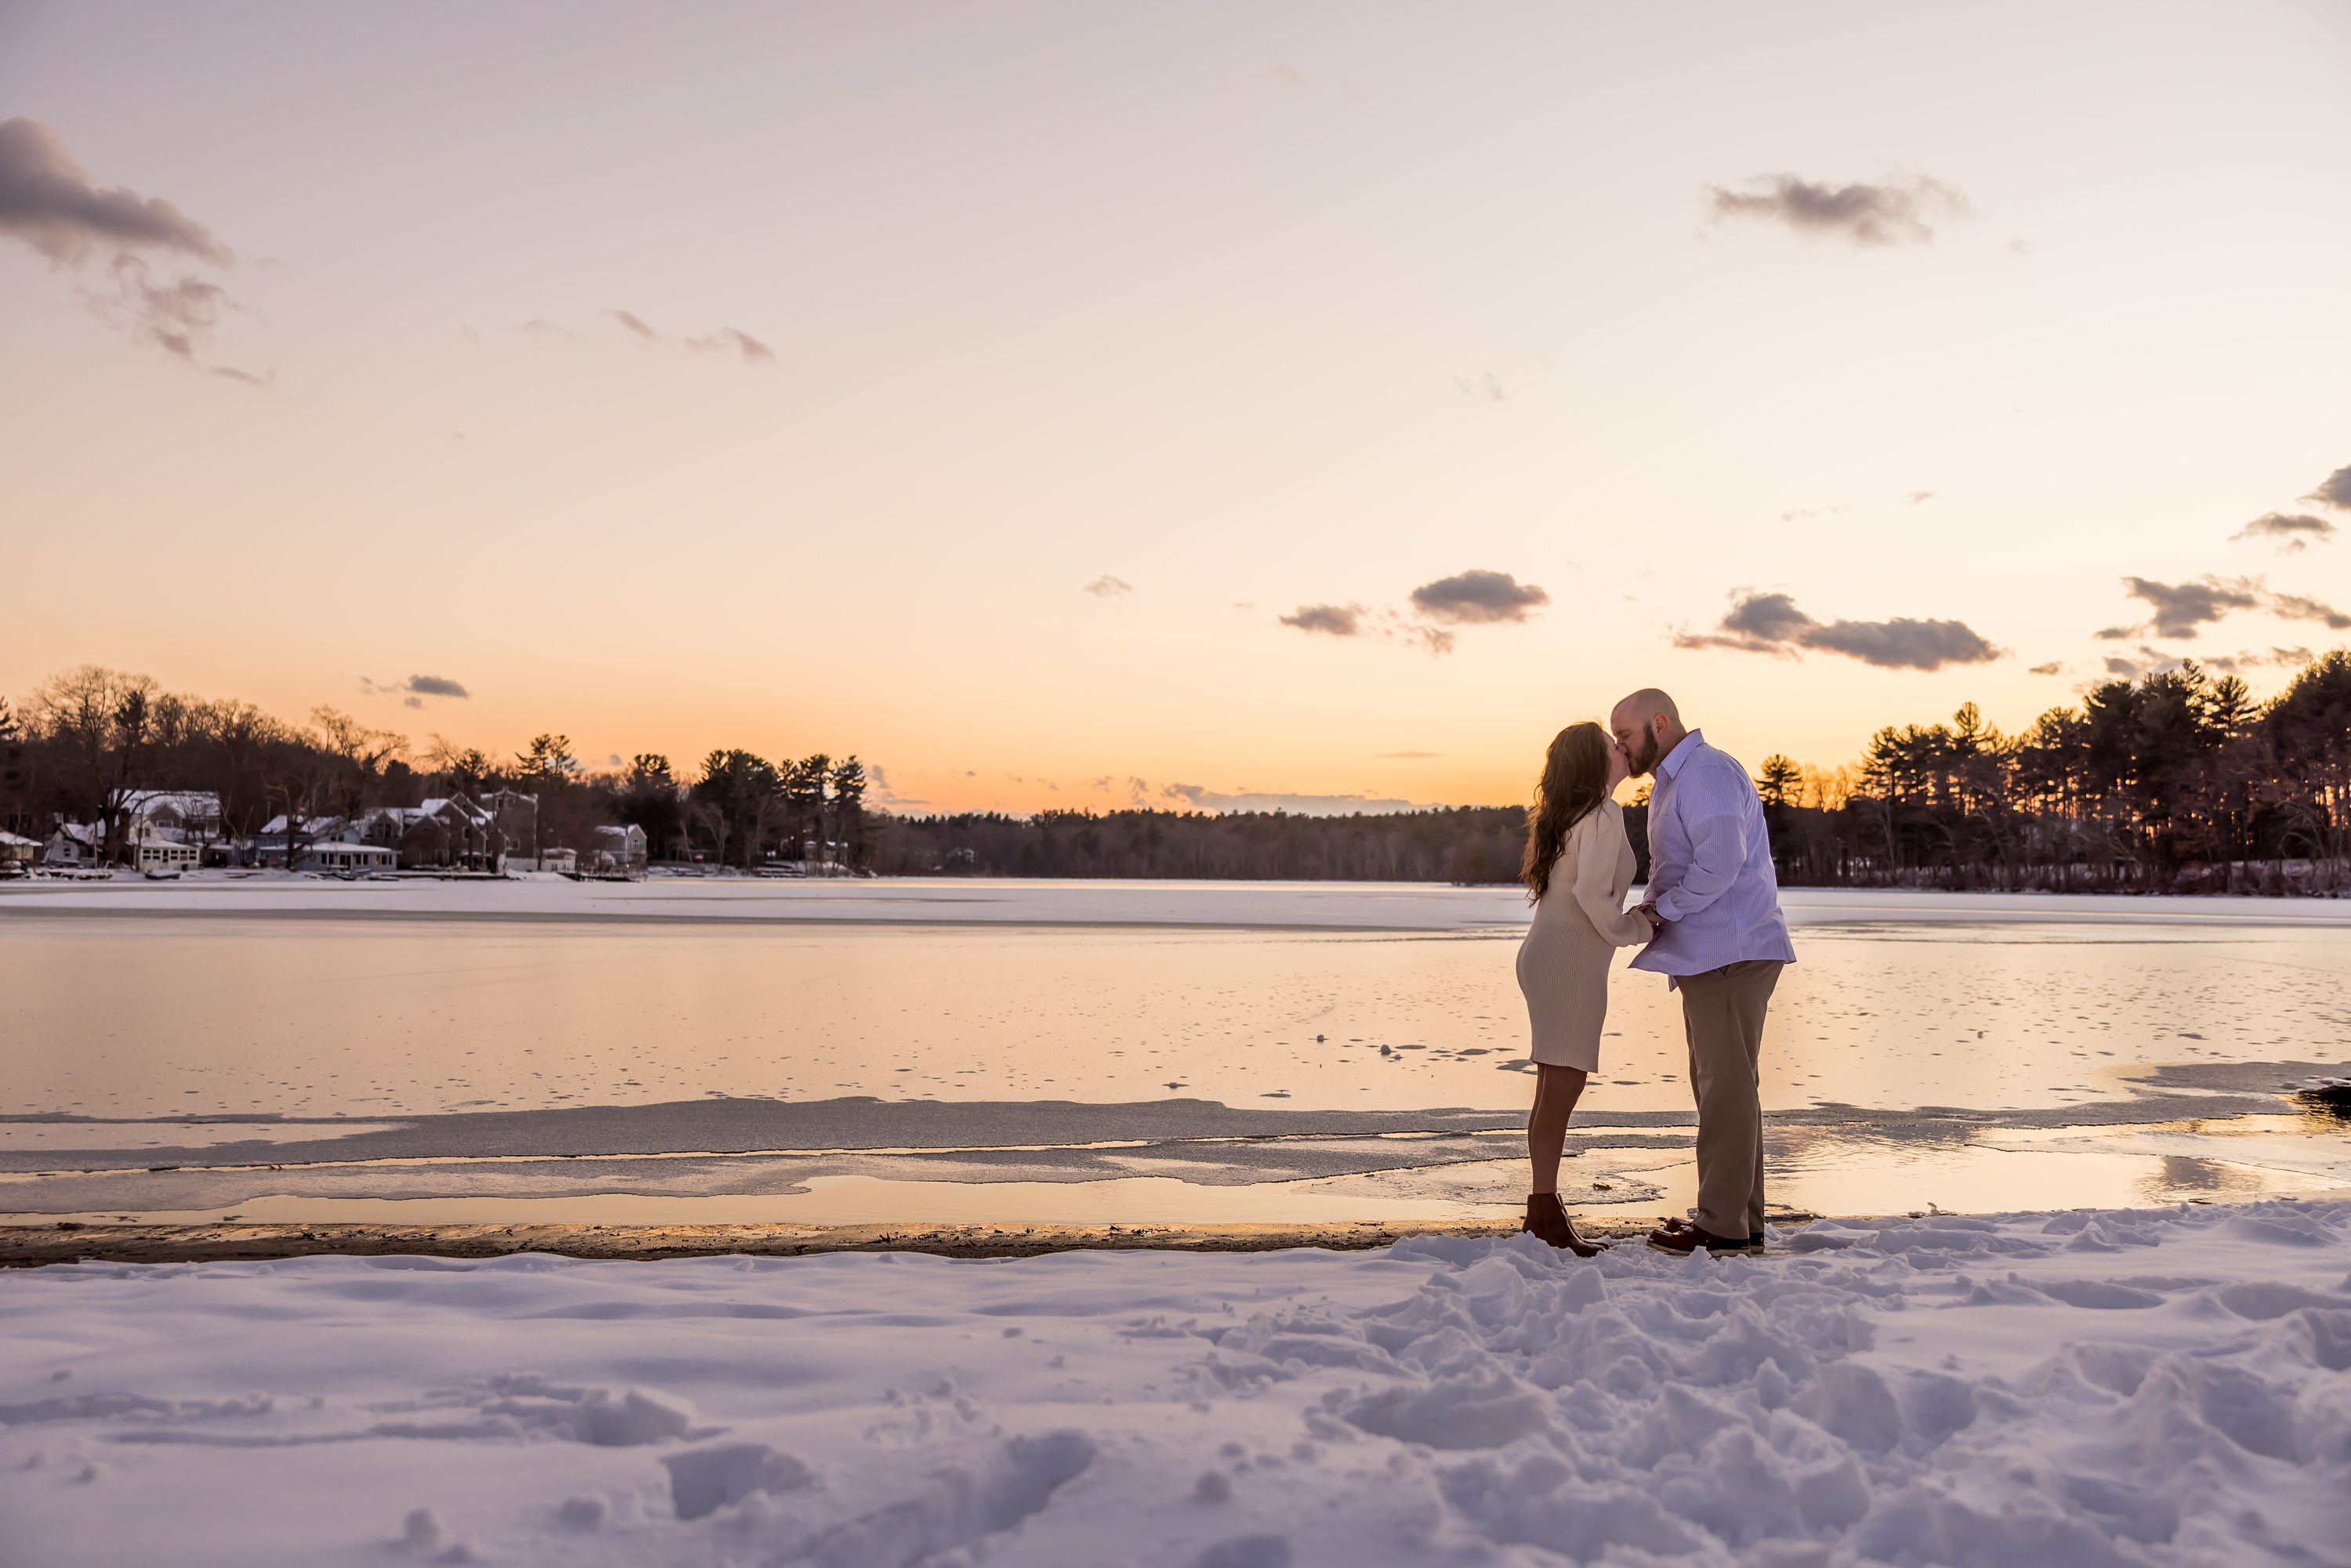 Boston Area Winter Engagement Photos in the Snow, Chelmsford, MA 